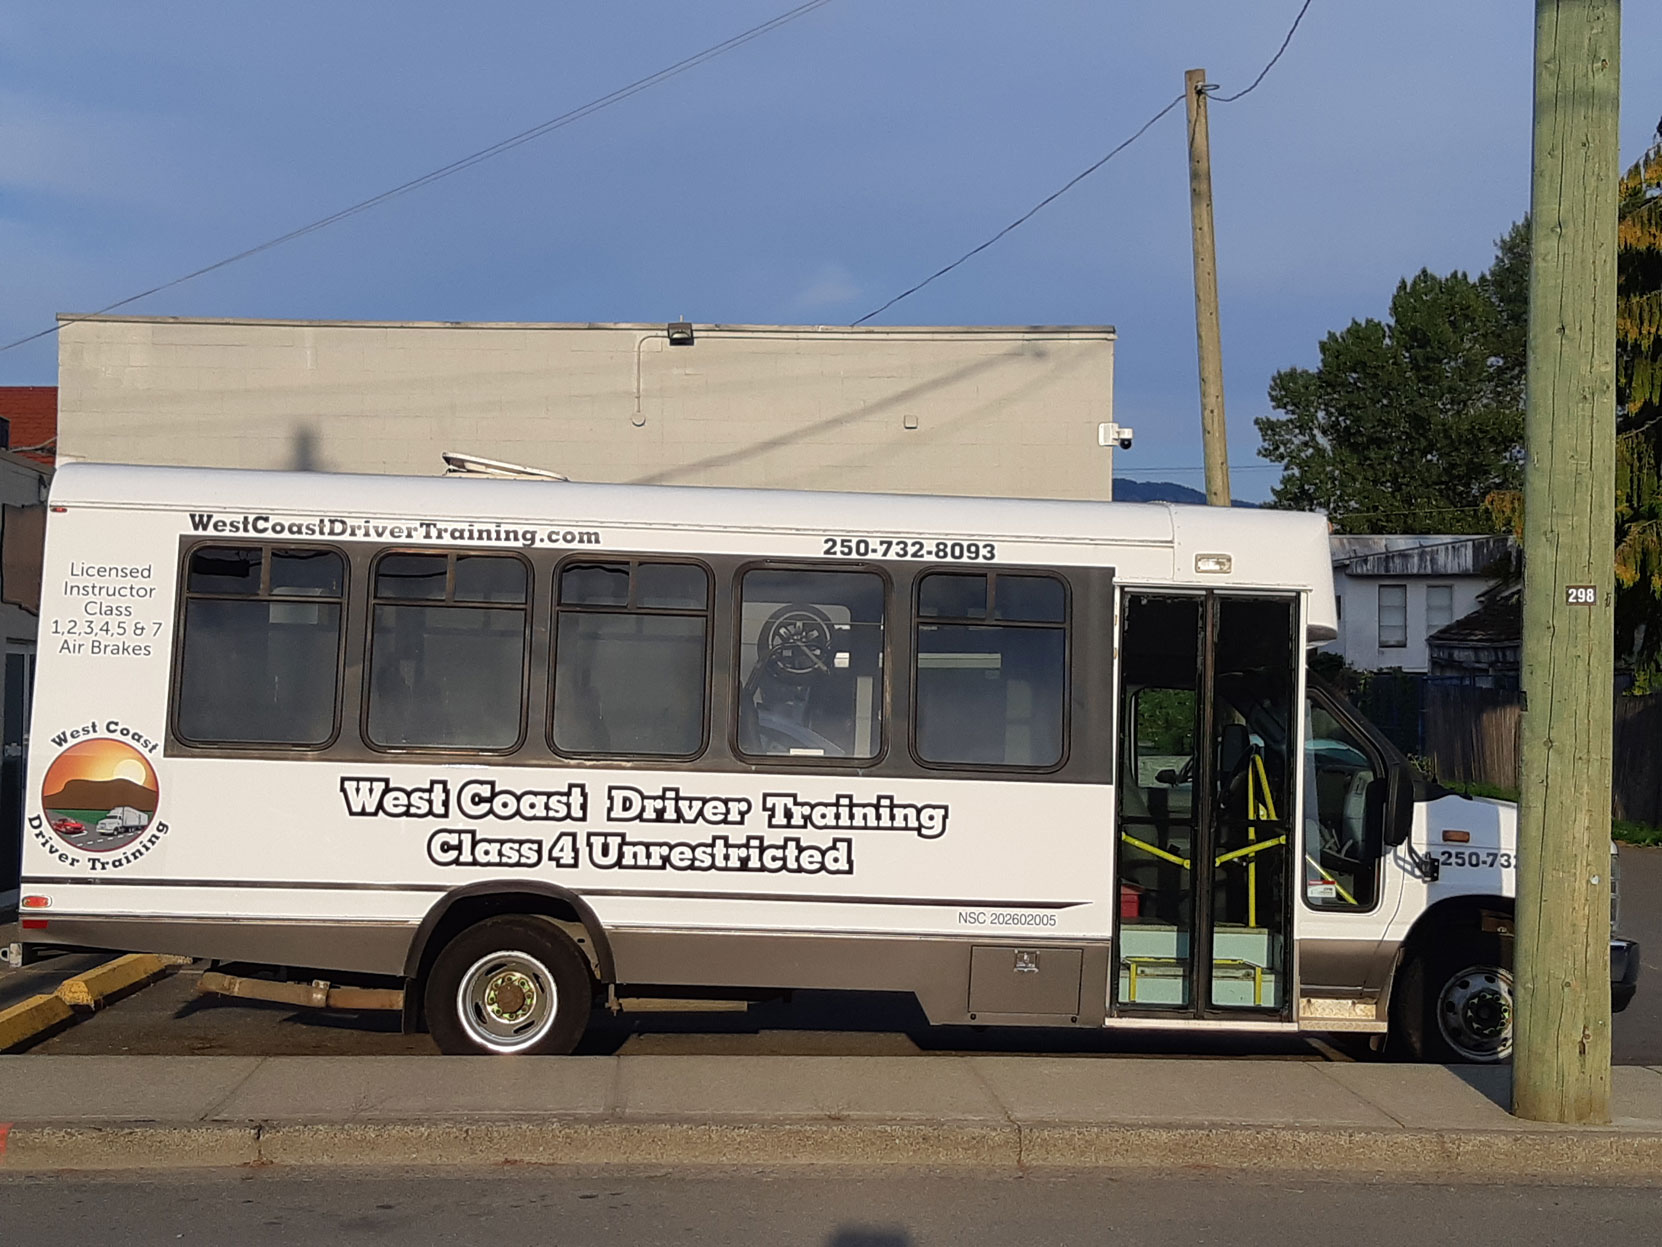 Our Ford E450 20 seat bus at Mark's Instant Sign Shop after application of its final signage [Photo: West Coast Driver Training]